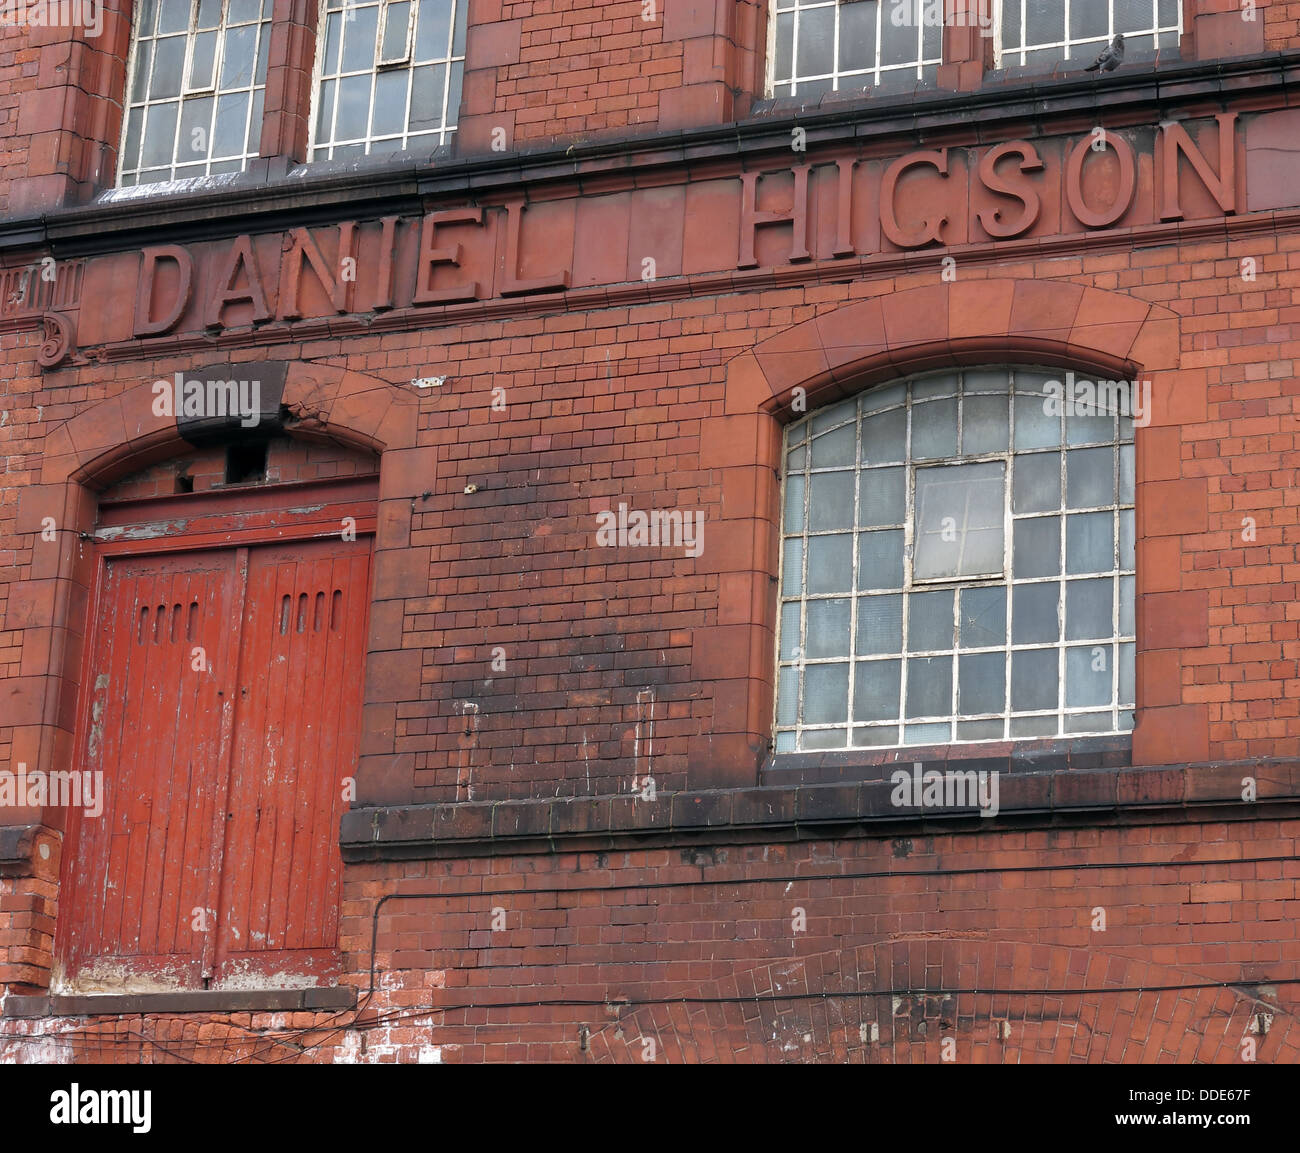 The old Higson Brewery, Liverpool Stock Photo